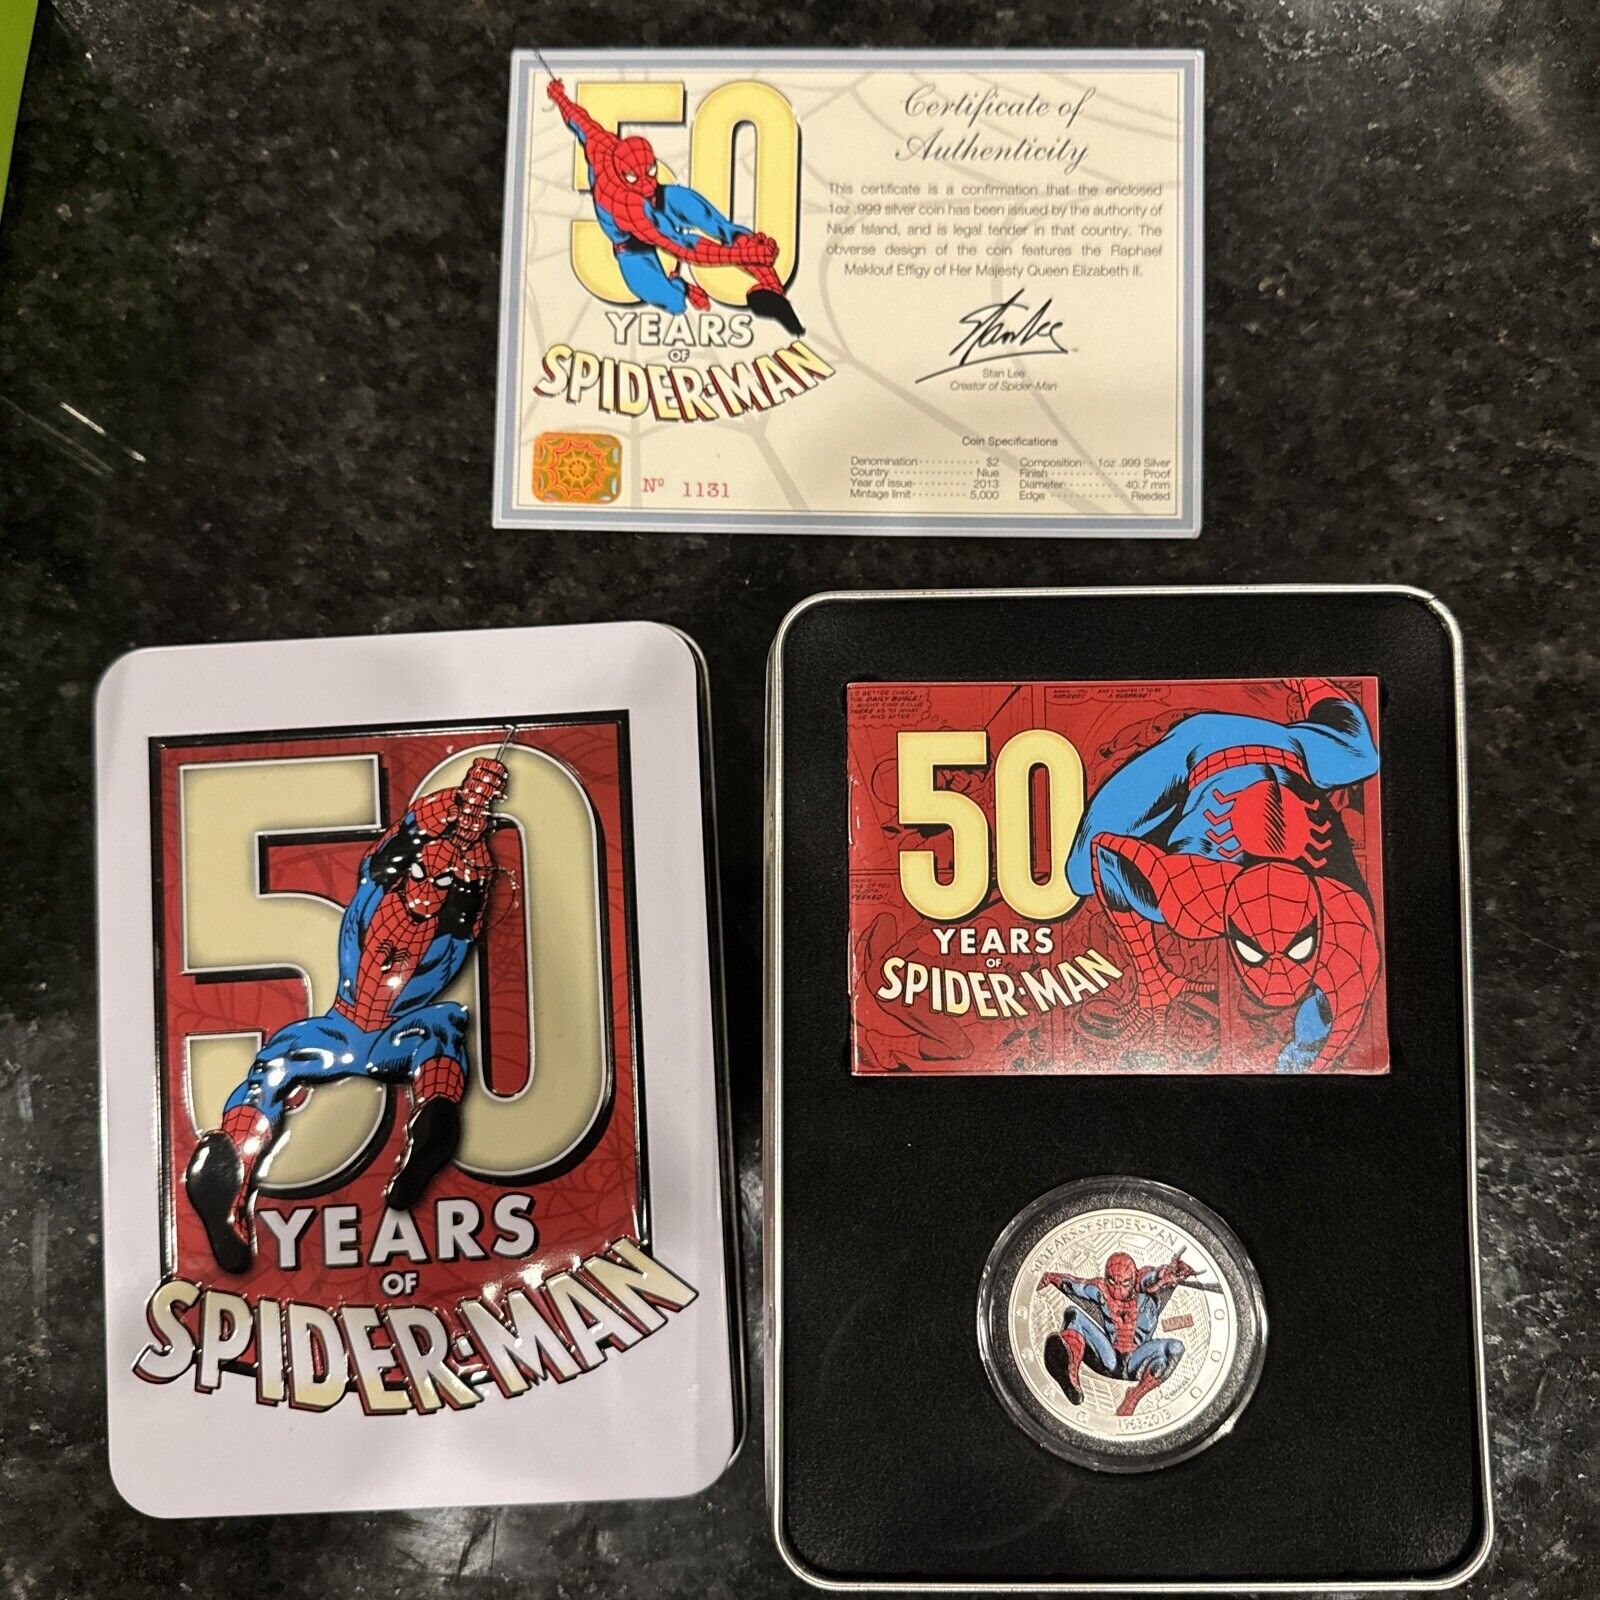 2013 50 Years of Spiderman 1 oz Silver Coin With Case - Niue